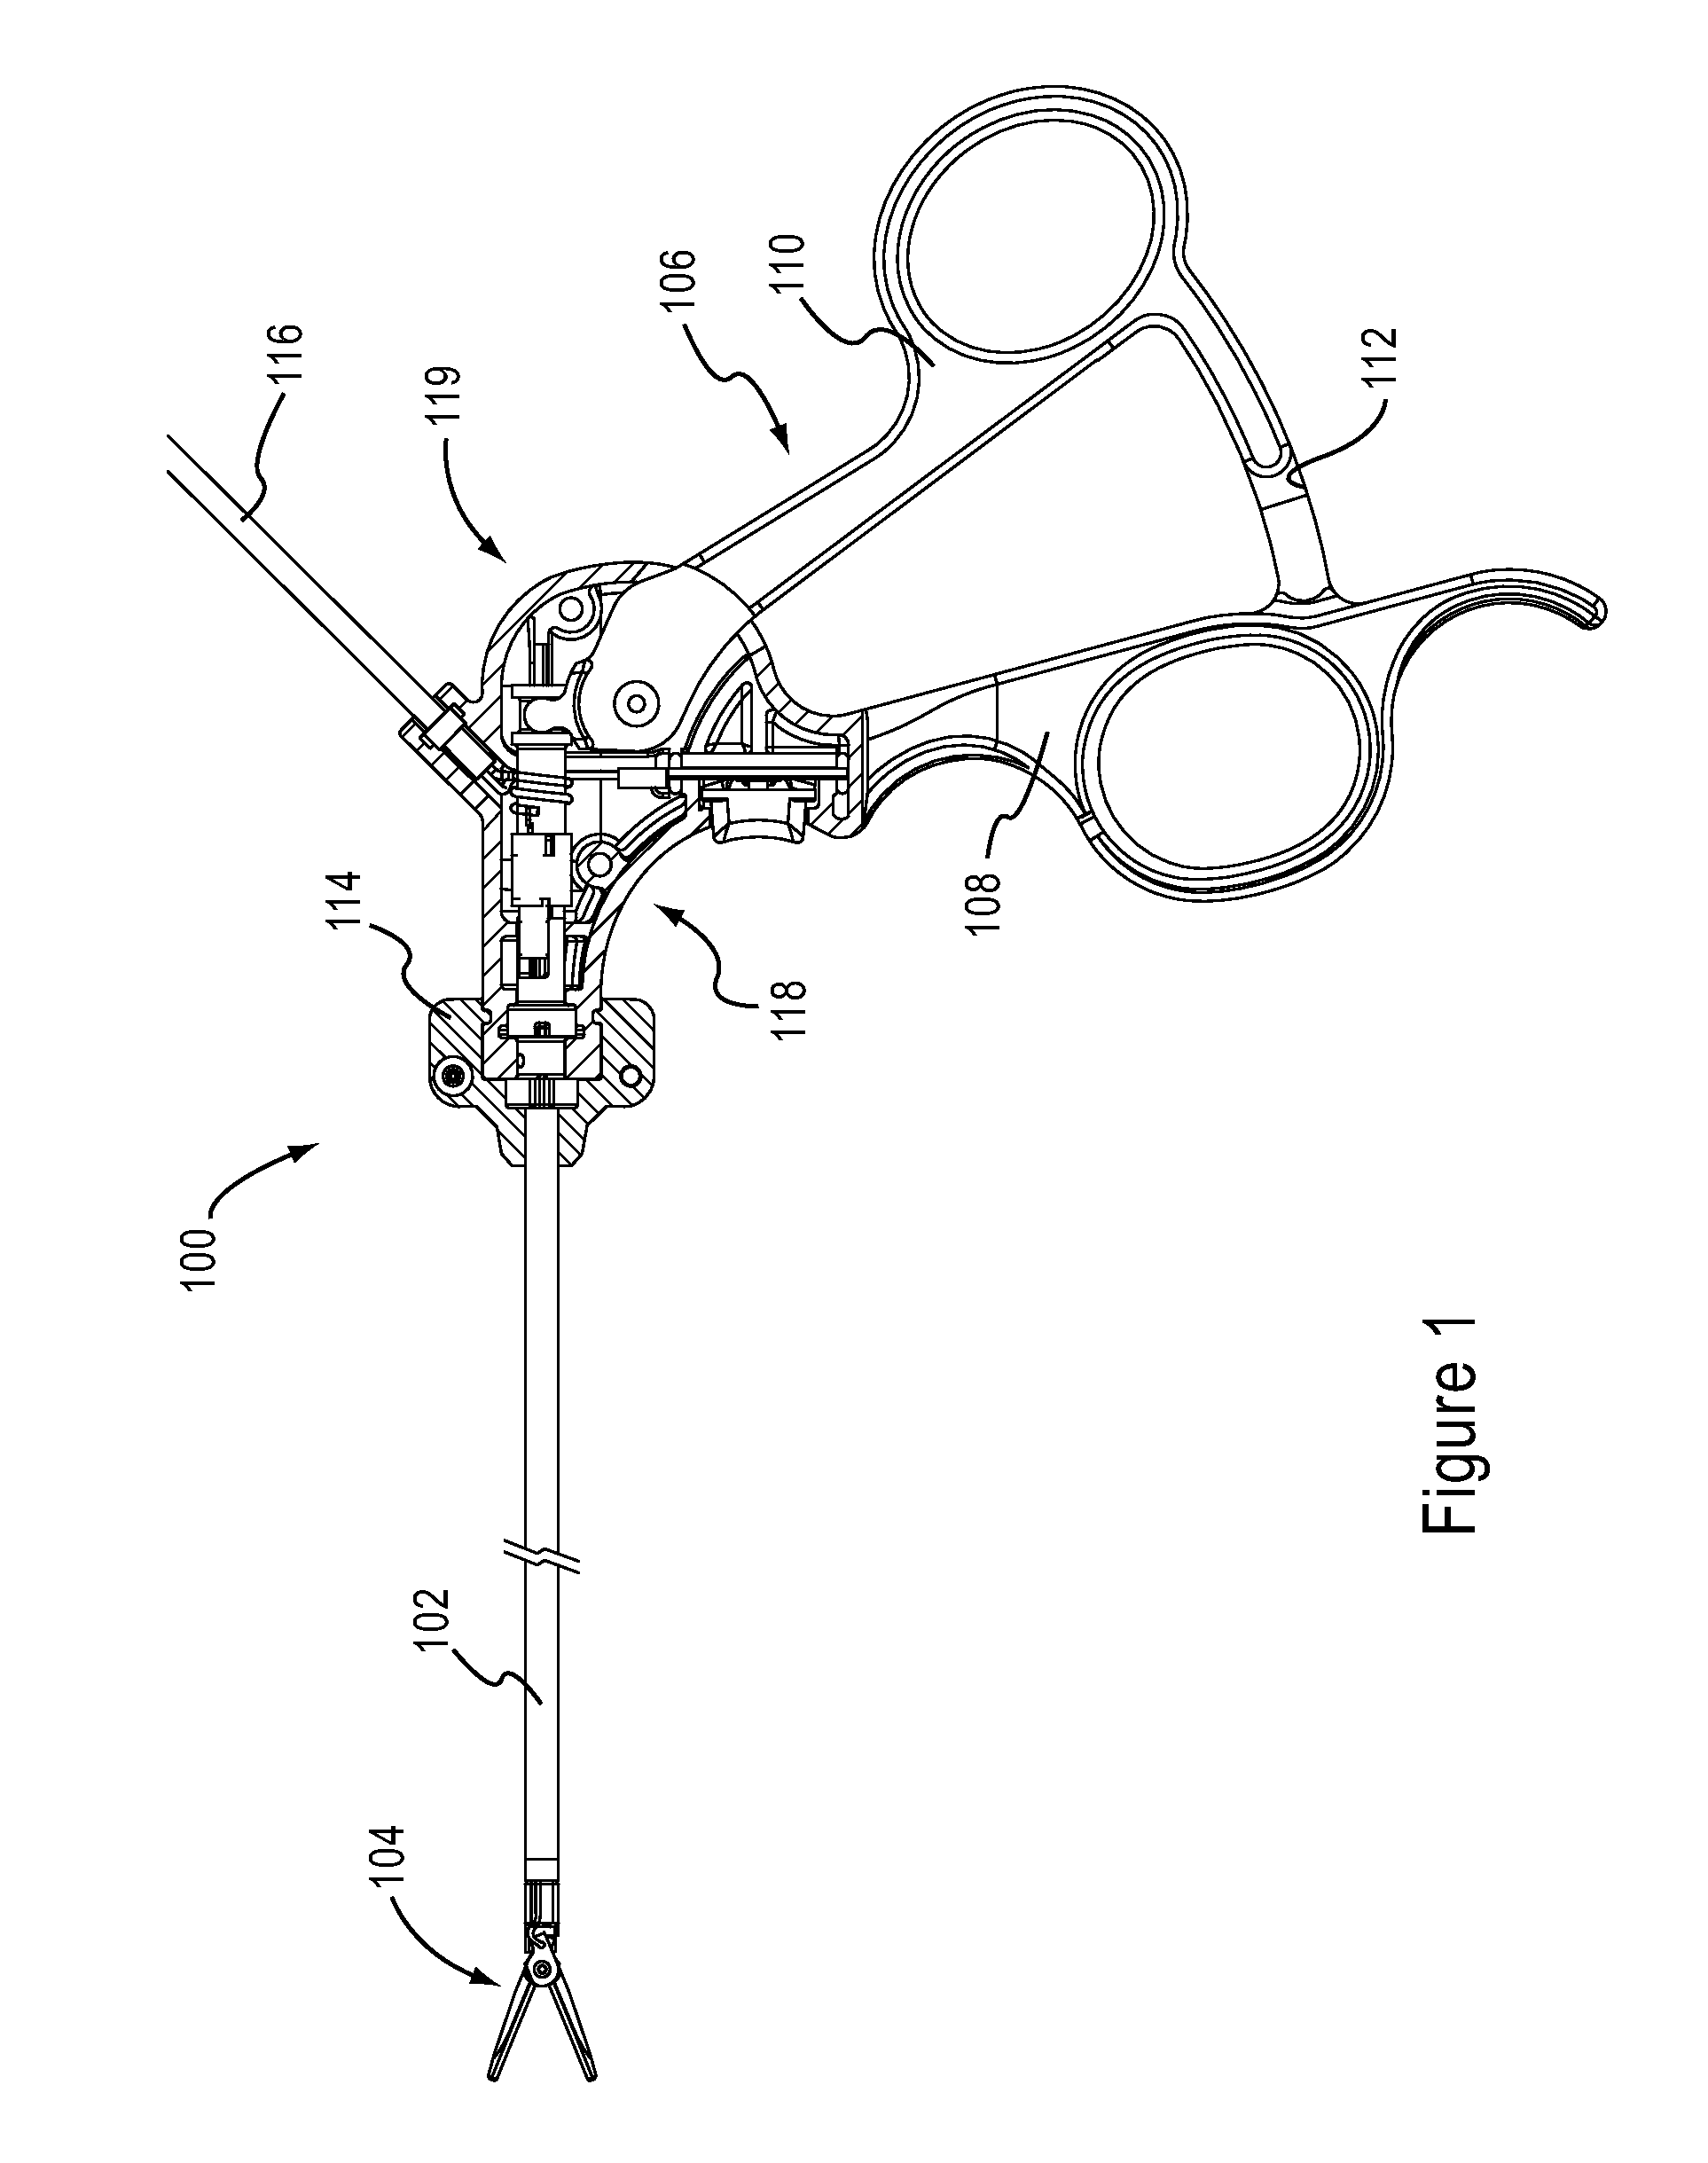 Low power tissue sealing device and method